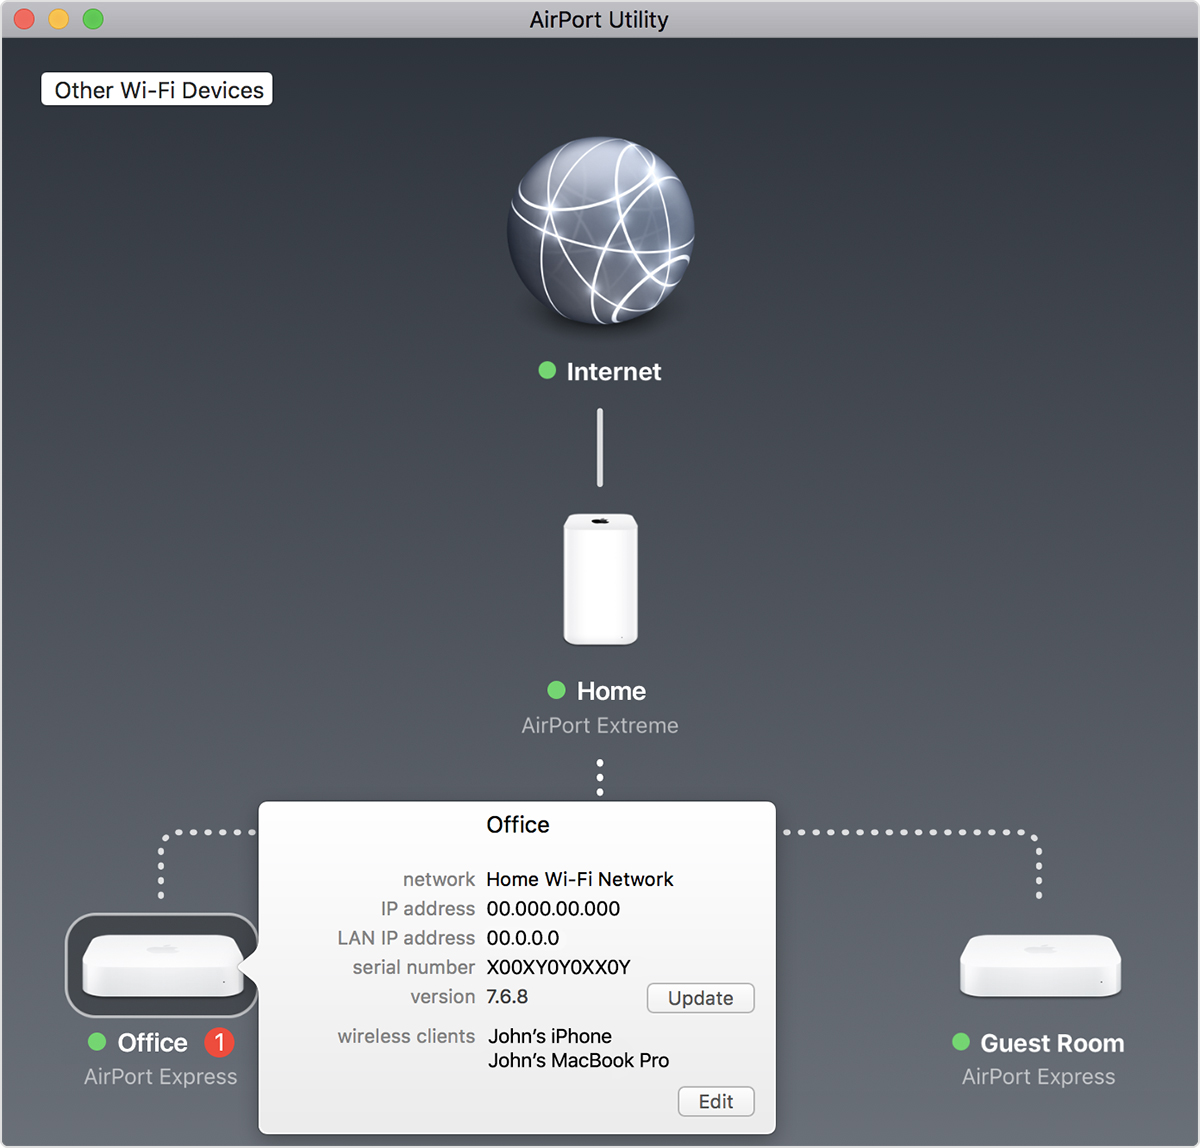 AirPort Utility on Mac